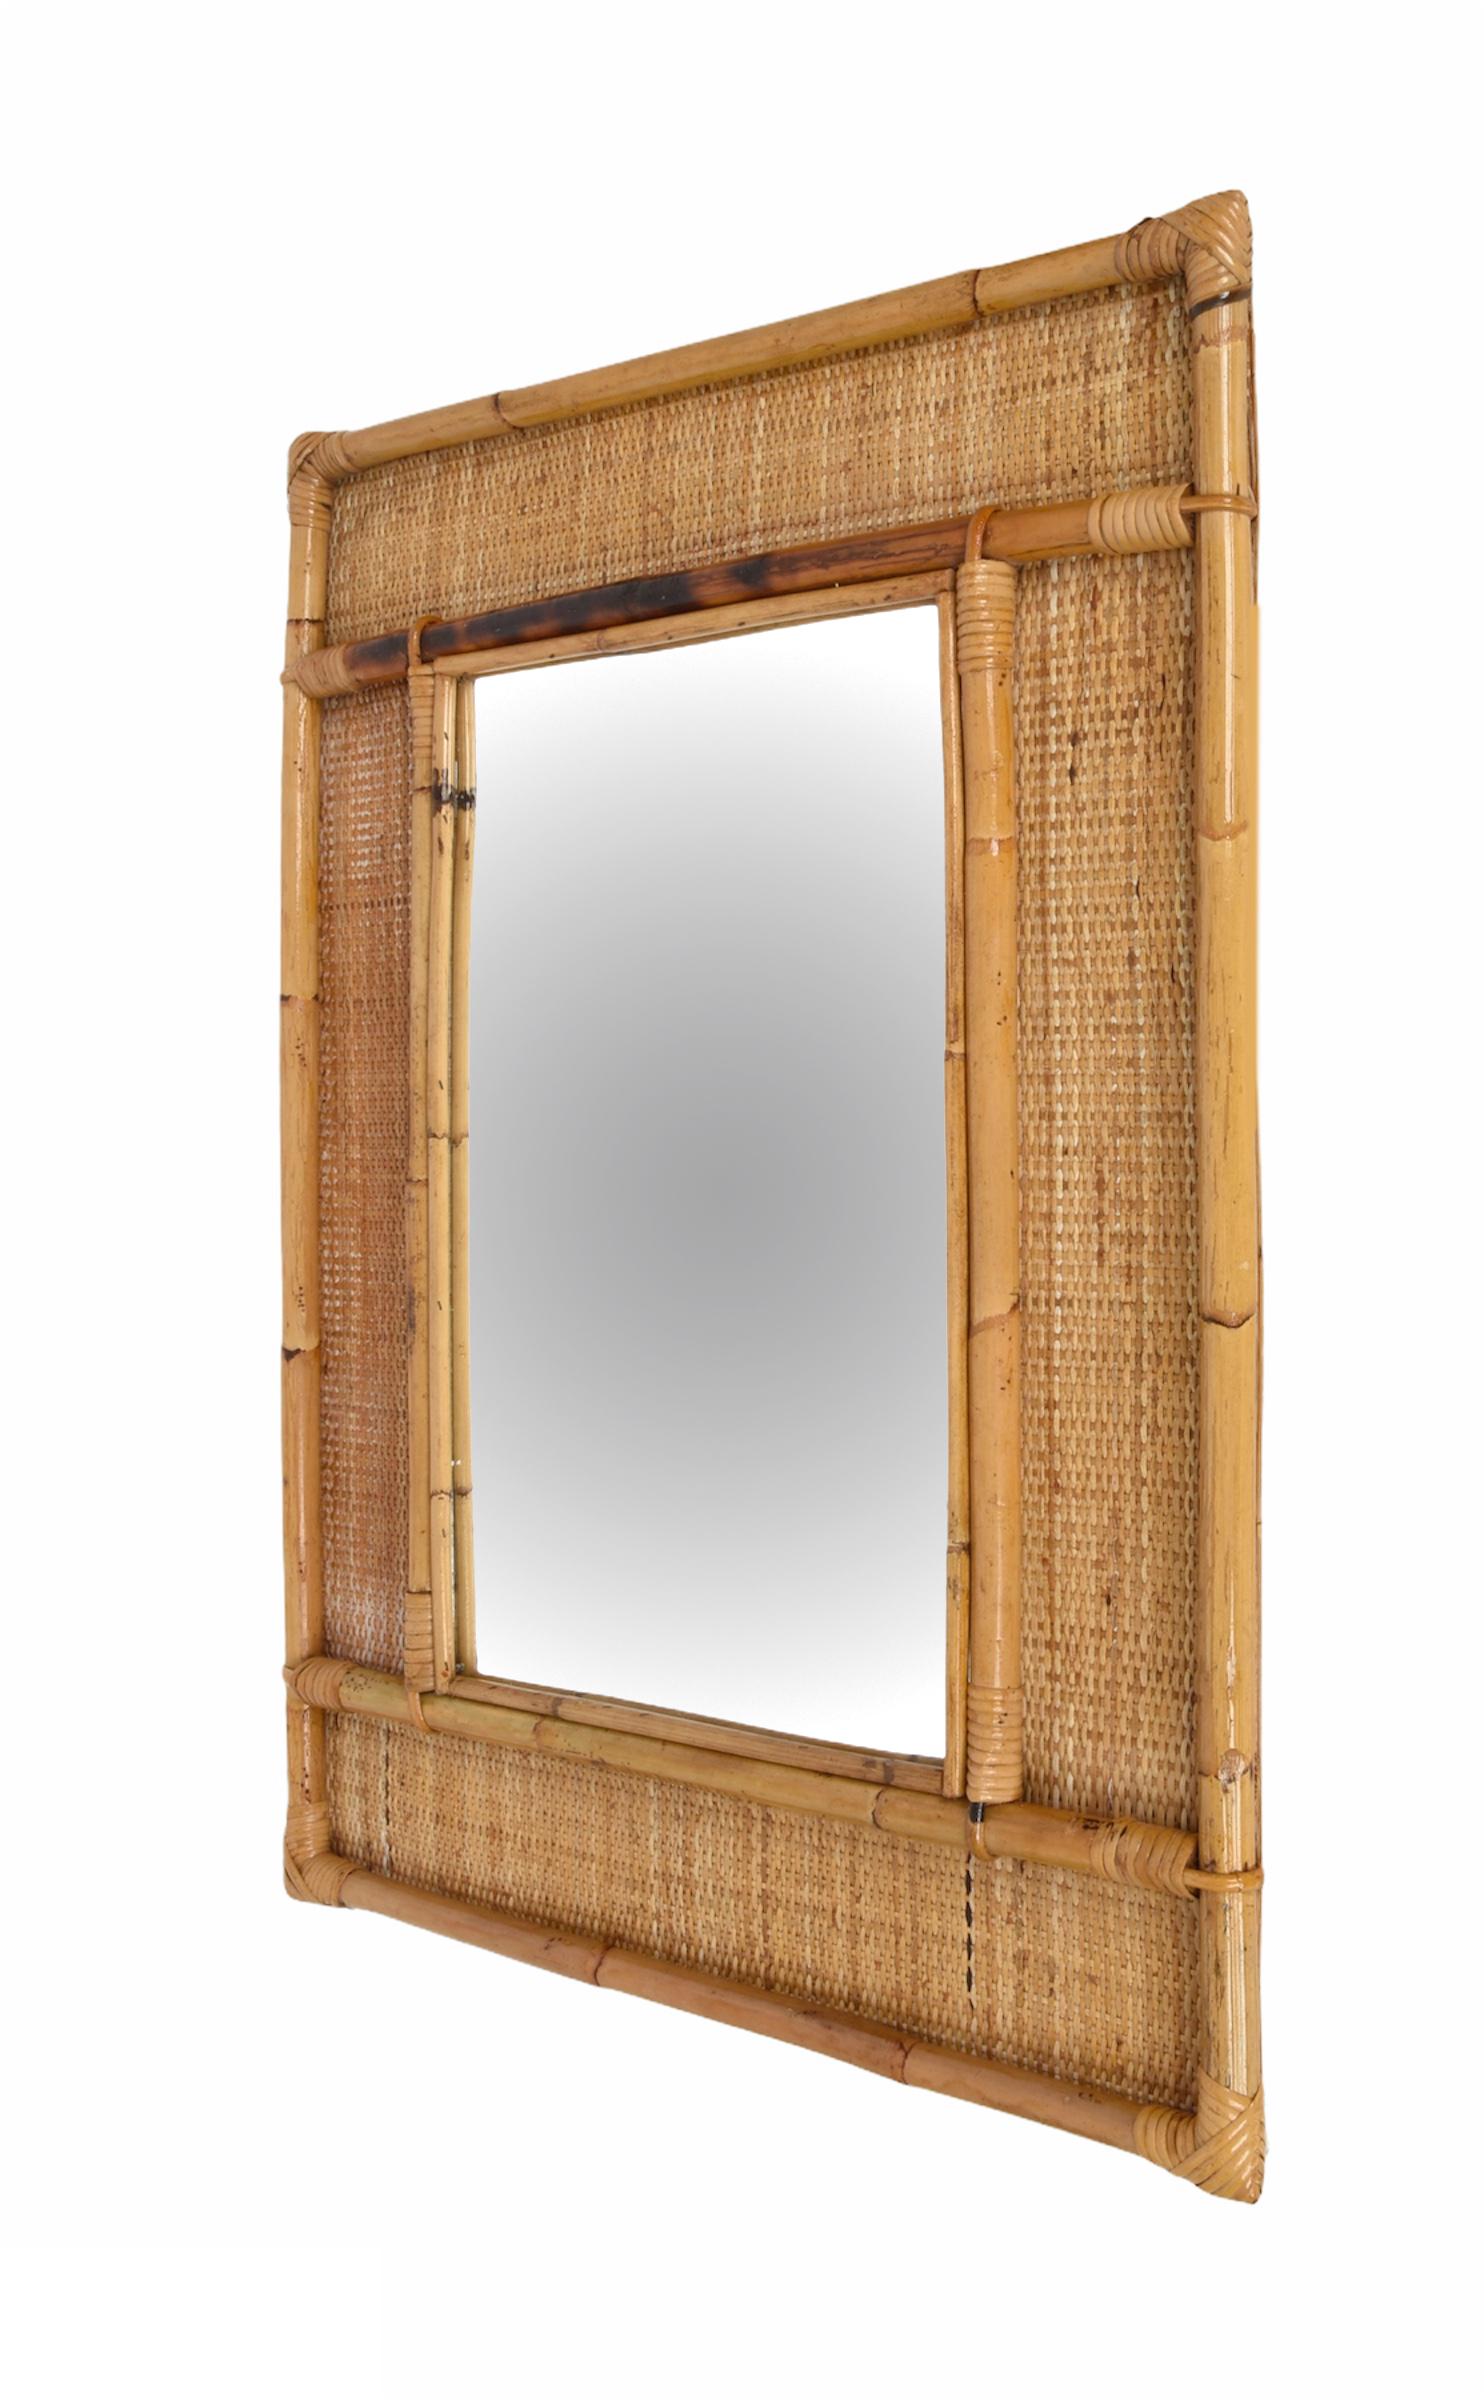 Midcentury Rectangular Italian Mirror with Bamboo and Woven Wicker Frame, 1970s 2